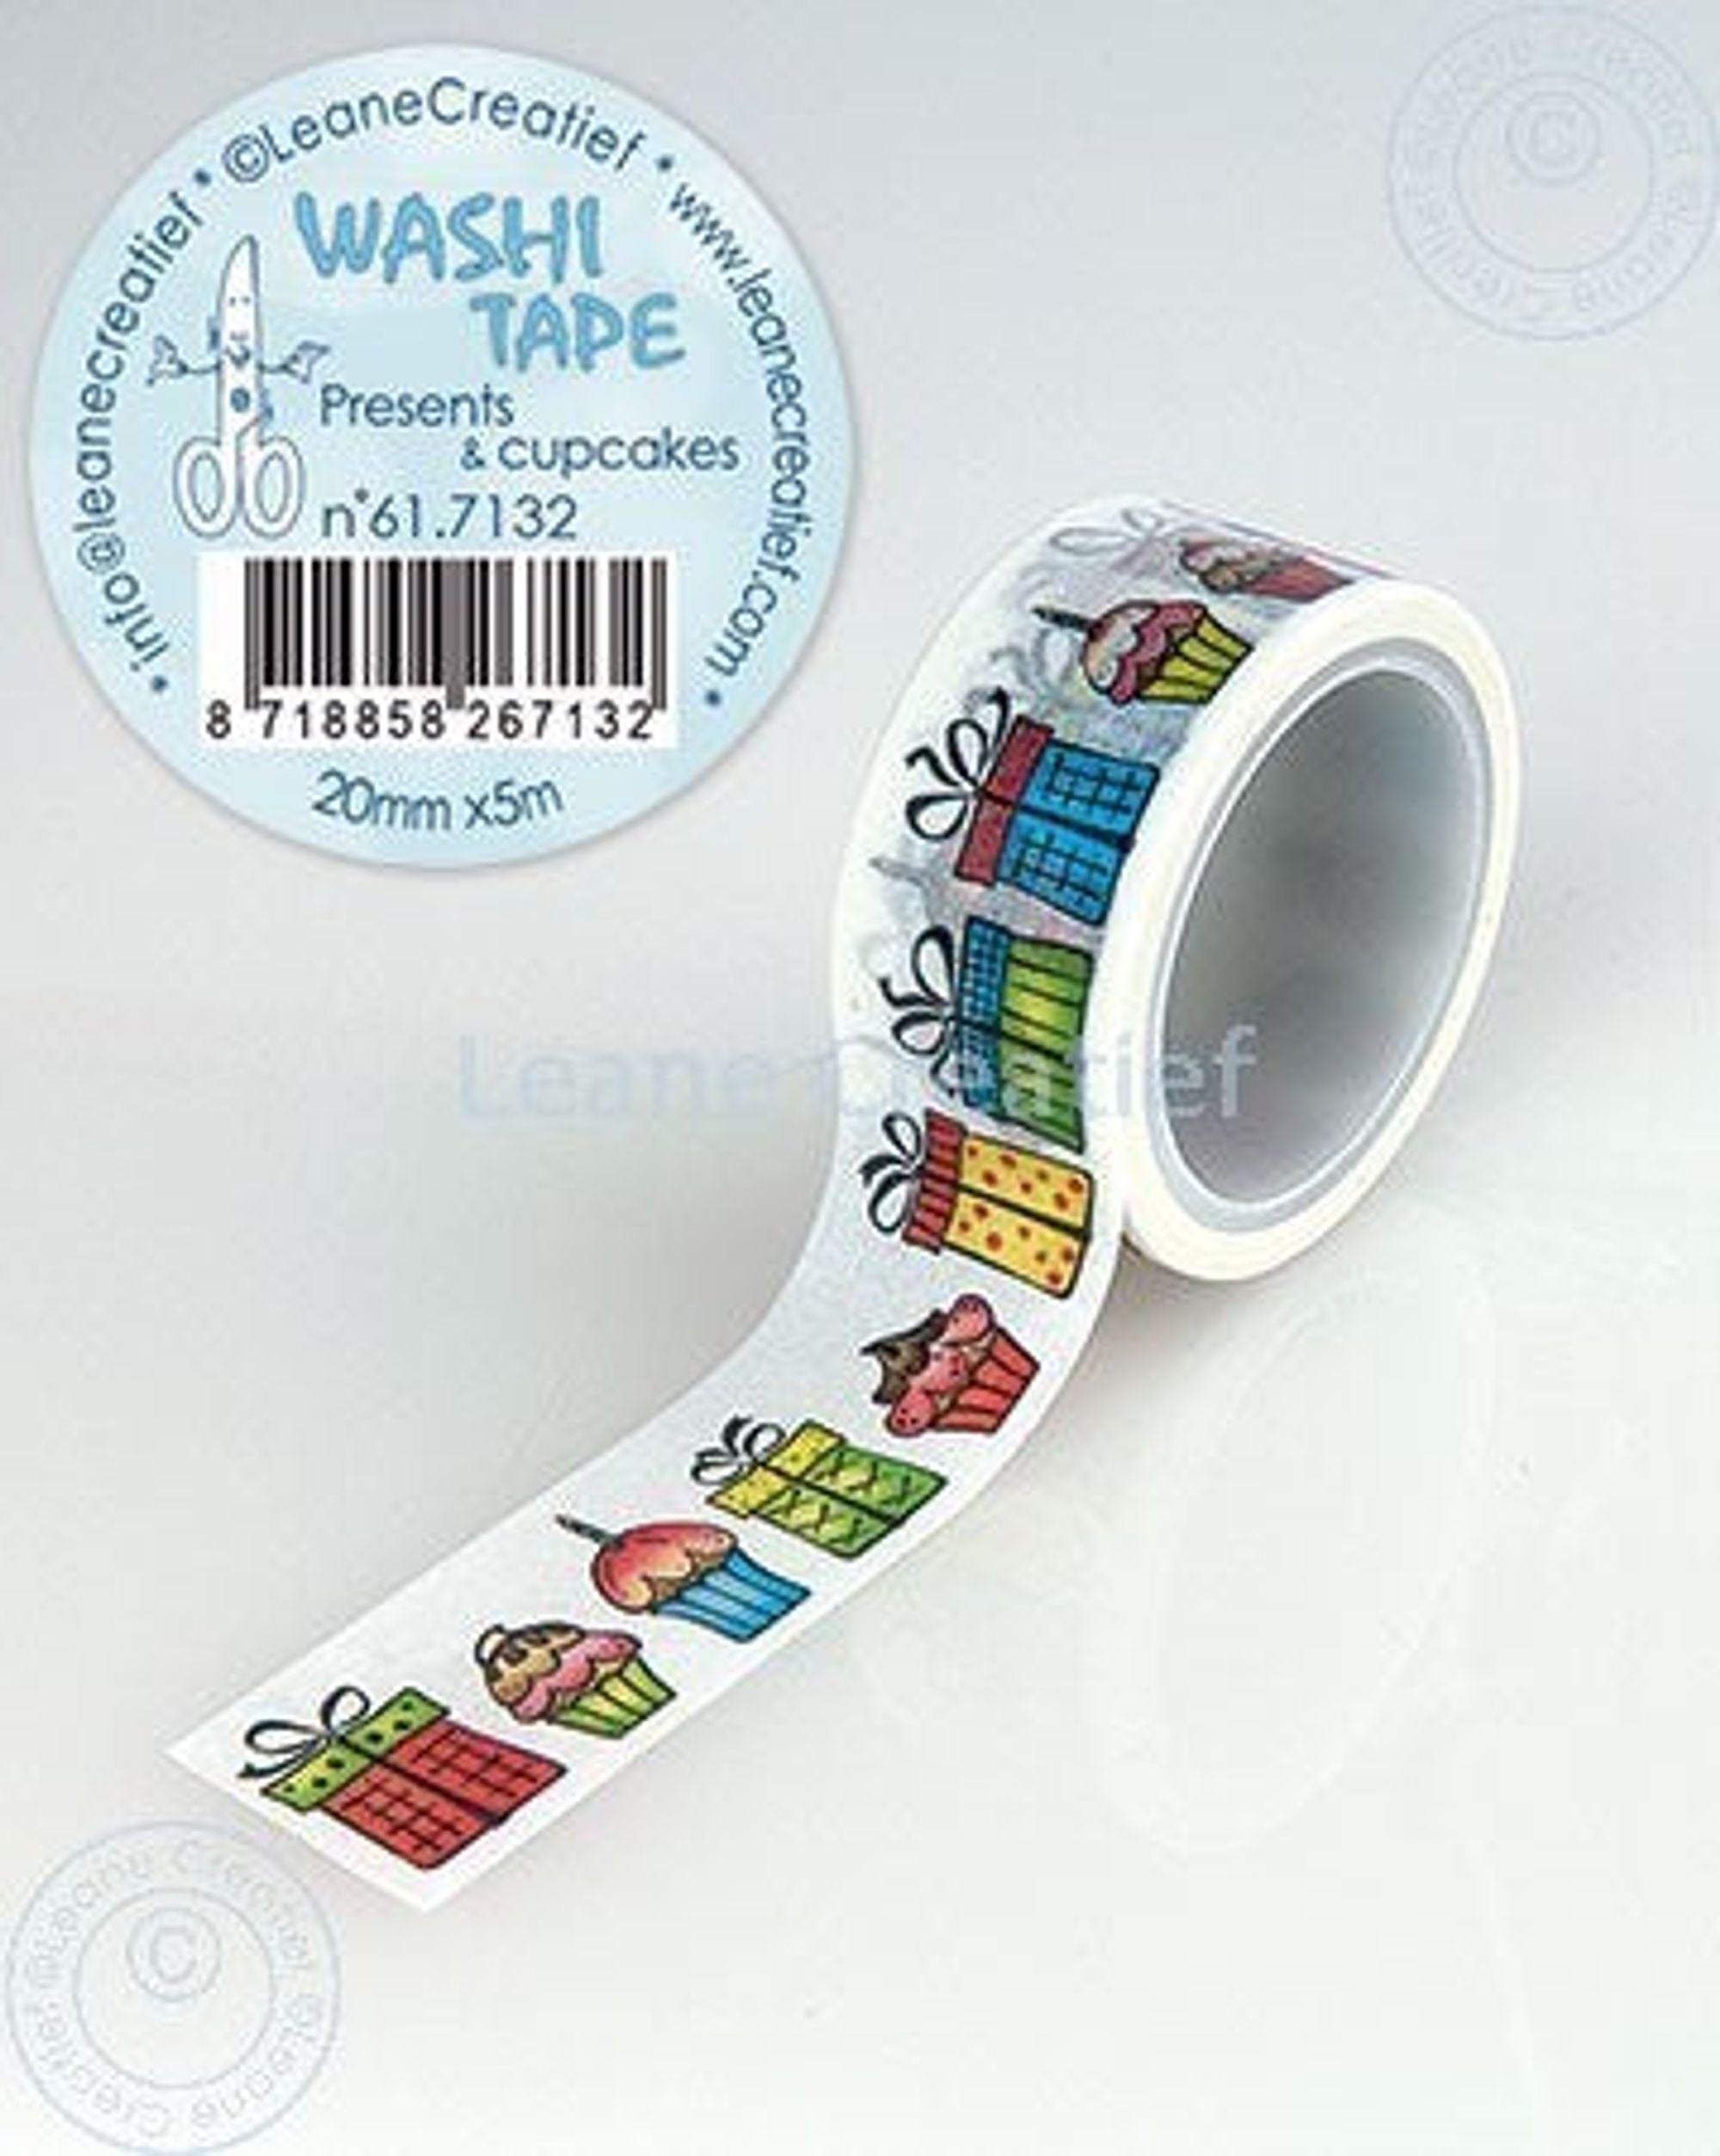 Washi Tape Presents & Cupcakes 20mm x5m